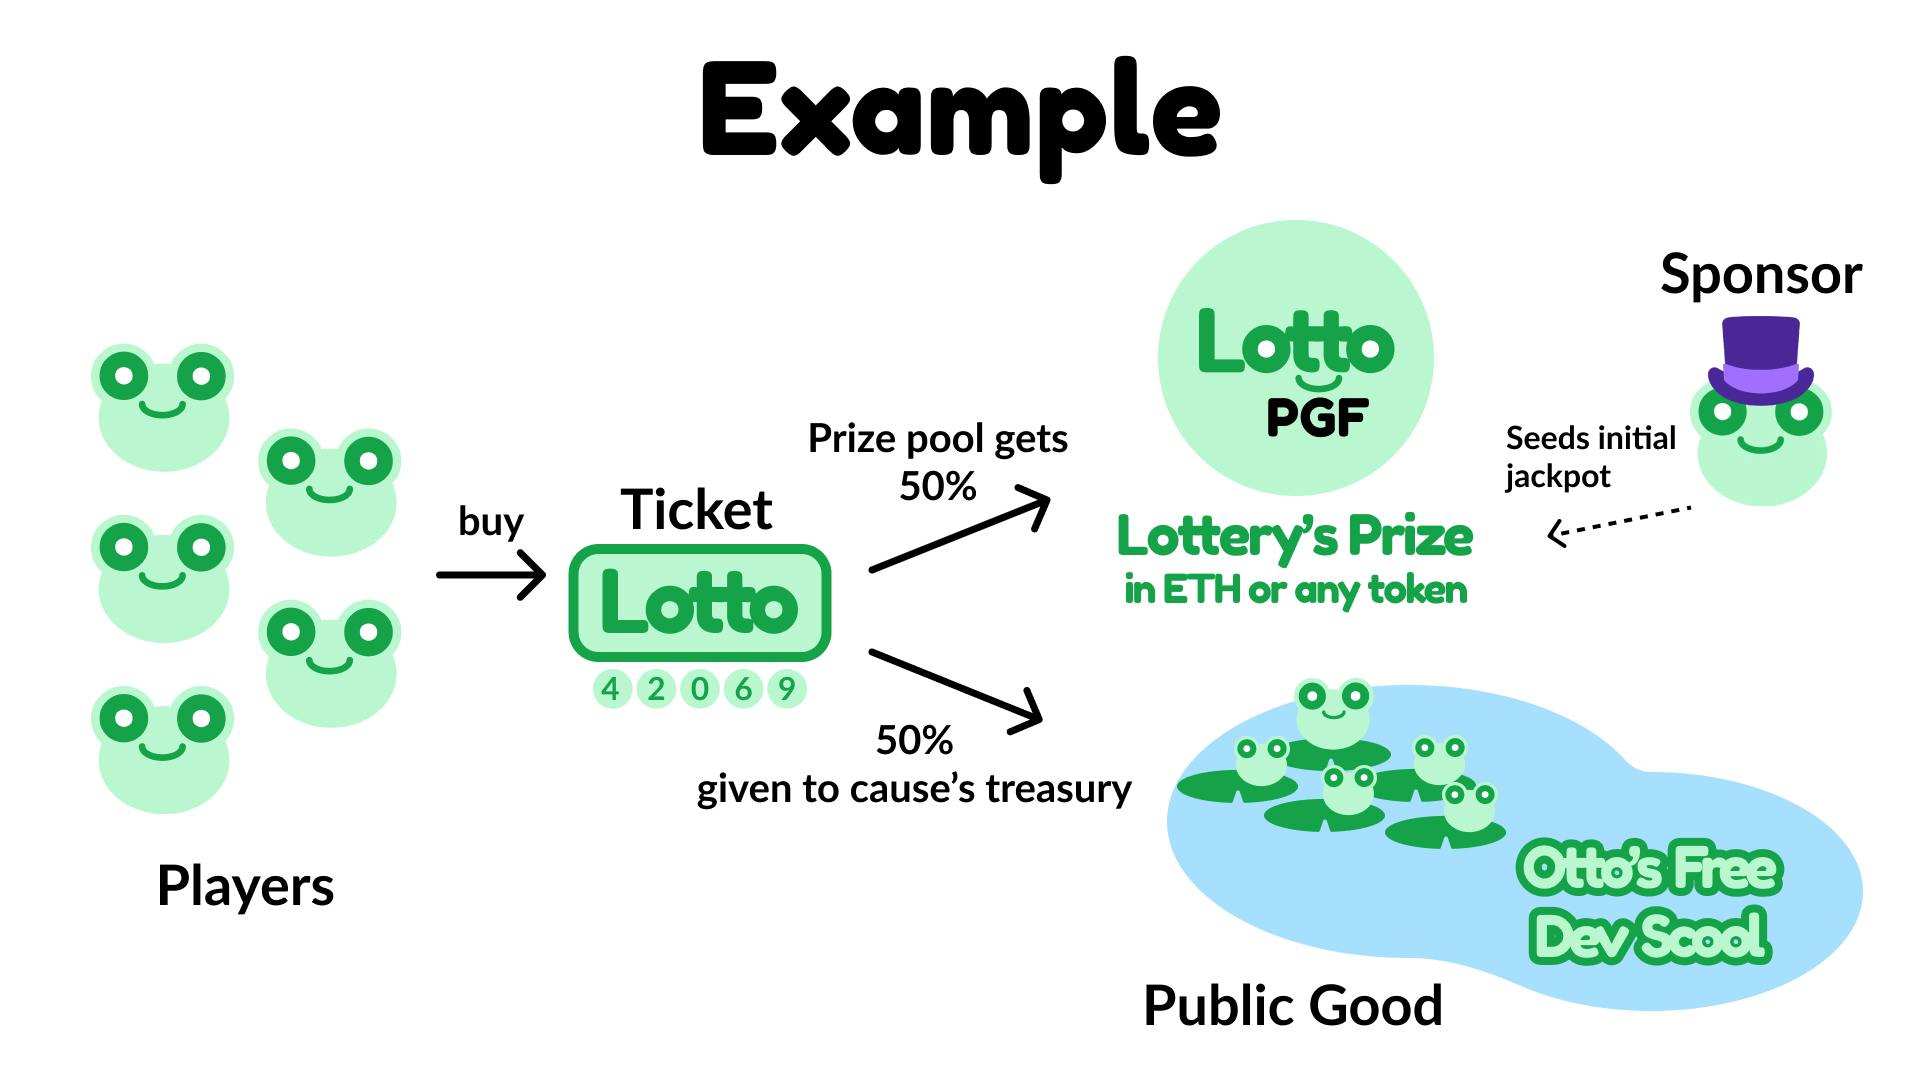 An example of how LottoPGF works: Players buy tickets and the sales revenue gets distributed to both the lottery's prize pool and the public good that deployed the lottery.